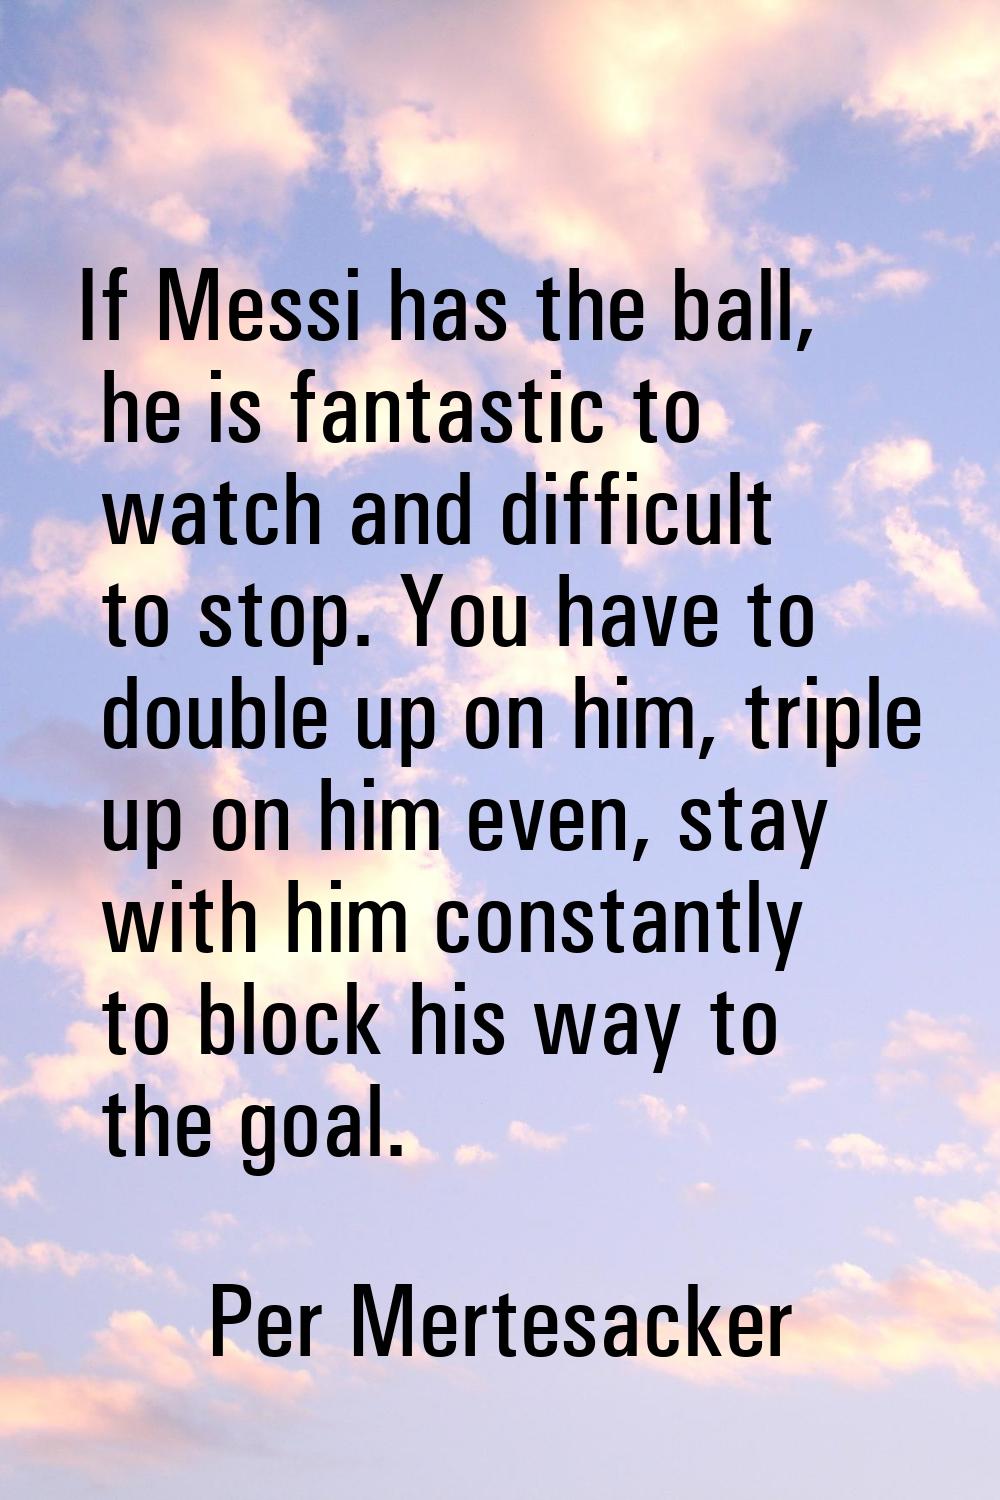 If Messi has the ball, he is fantastic to watch and difficult to stop. You have to double up on him